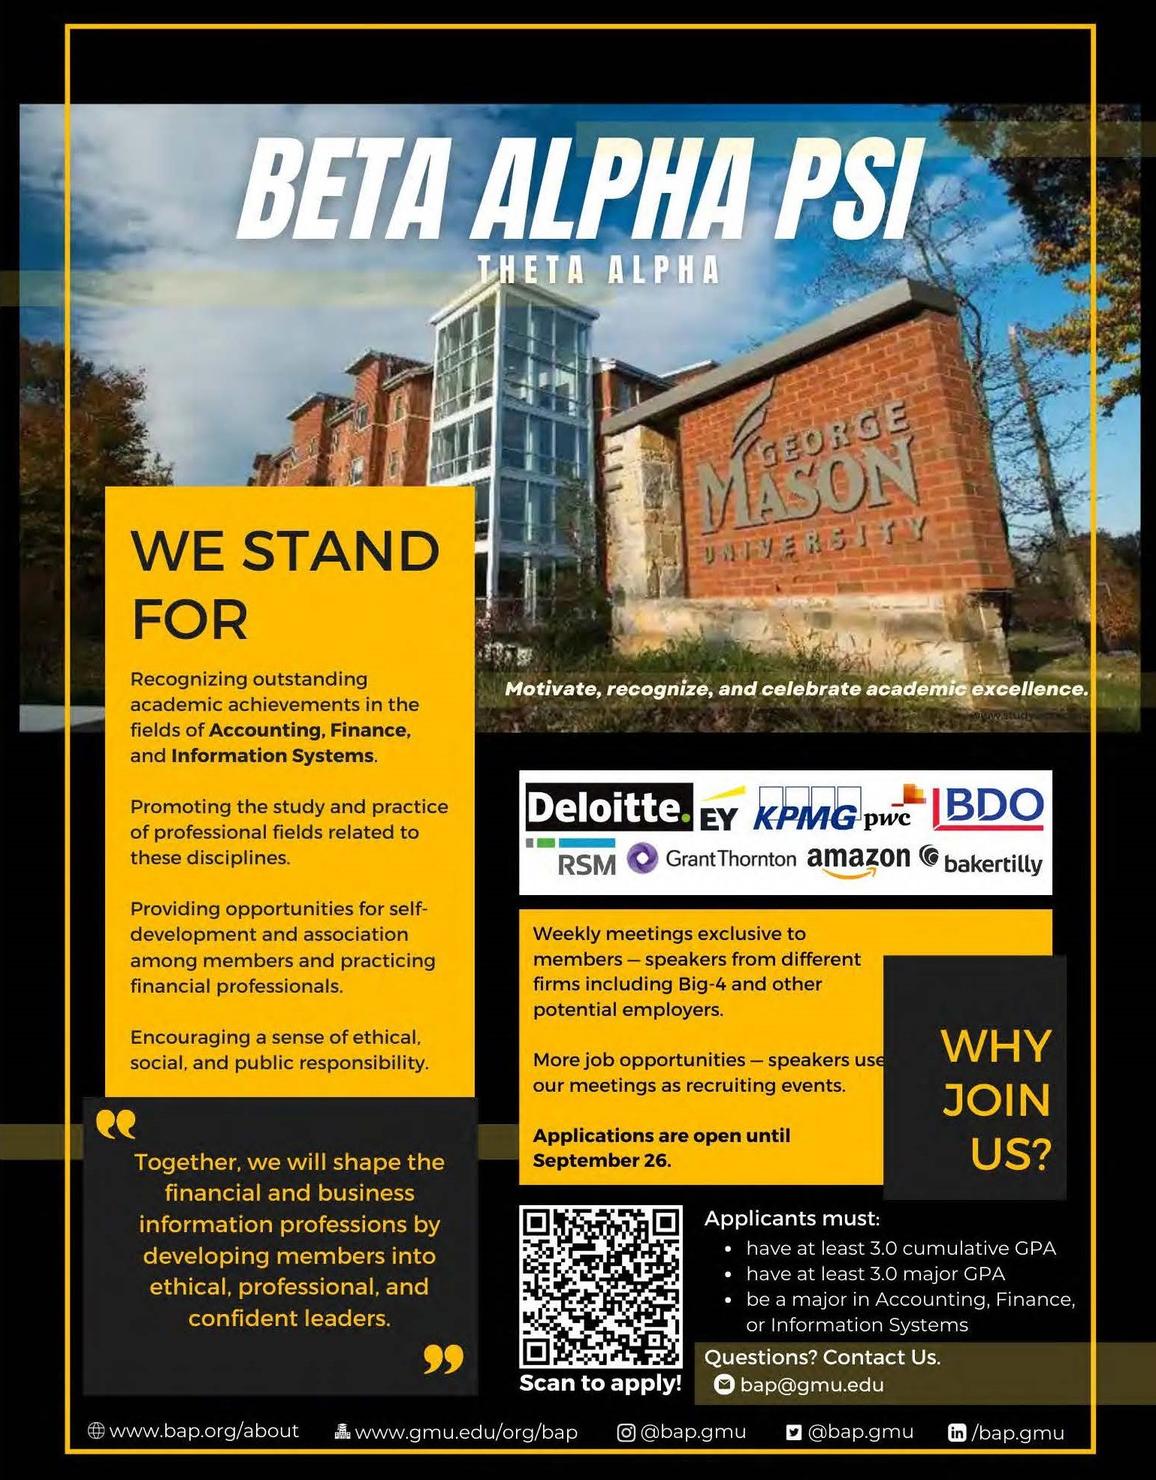 Beta Alpha Psi is accepting applications for their Theta Alpha Chapter.  Applications are available online and due by September 26, 2022.